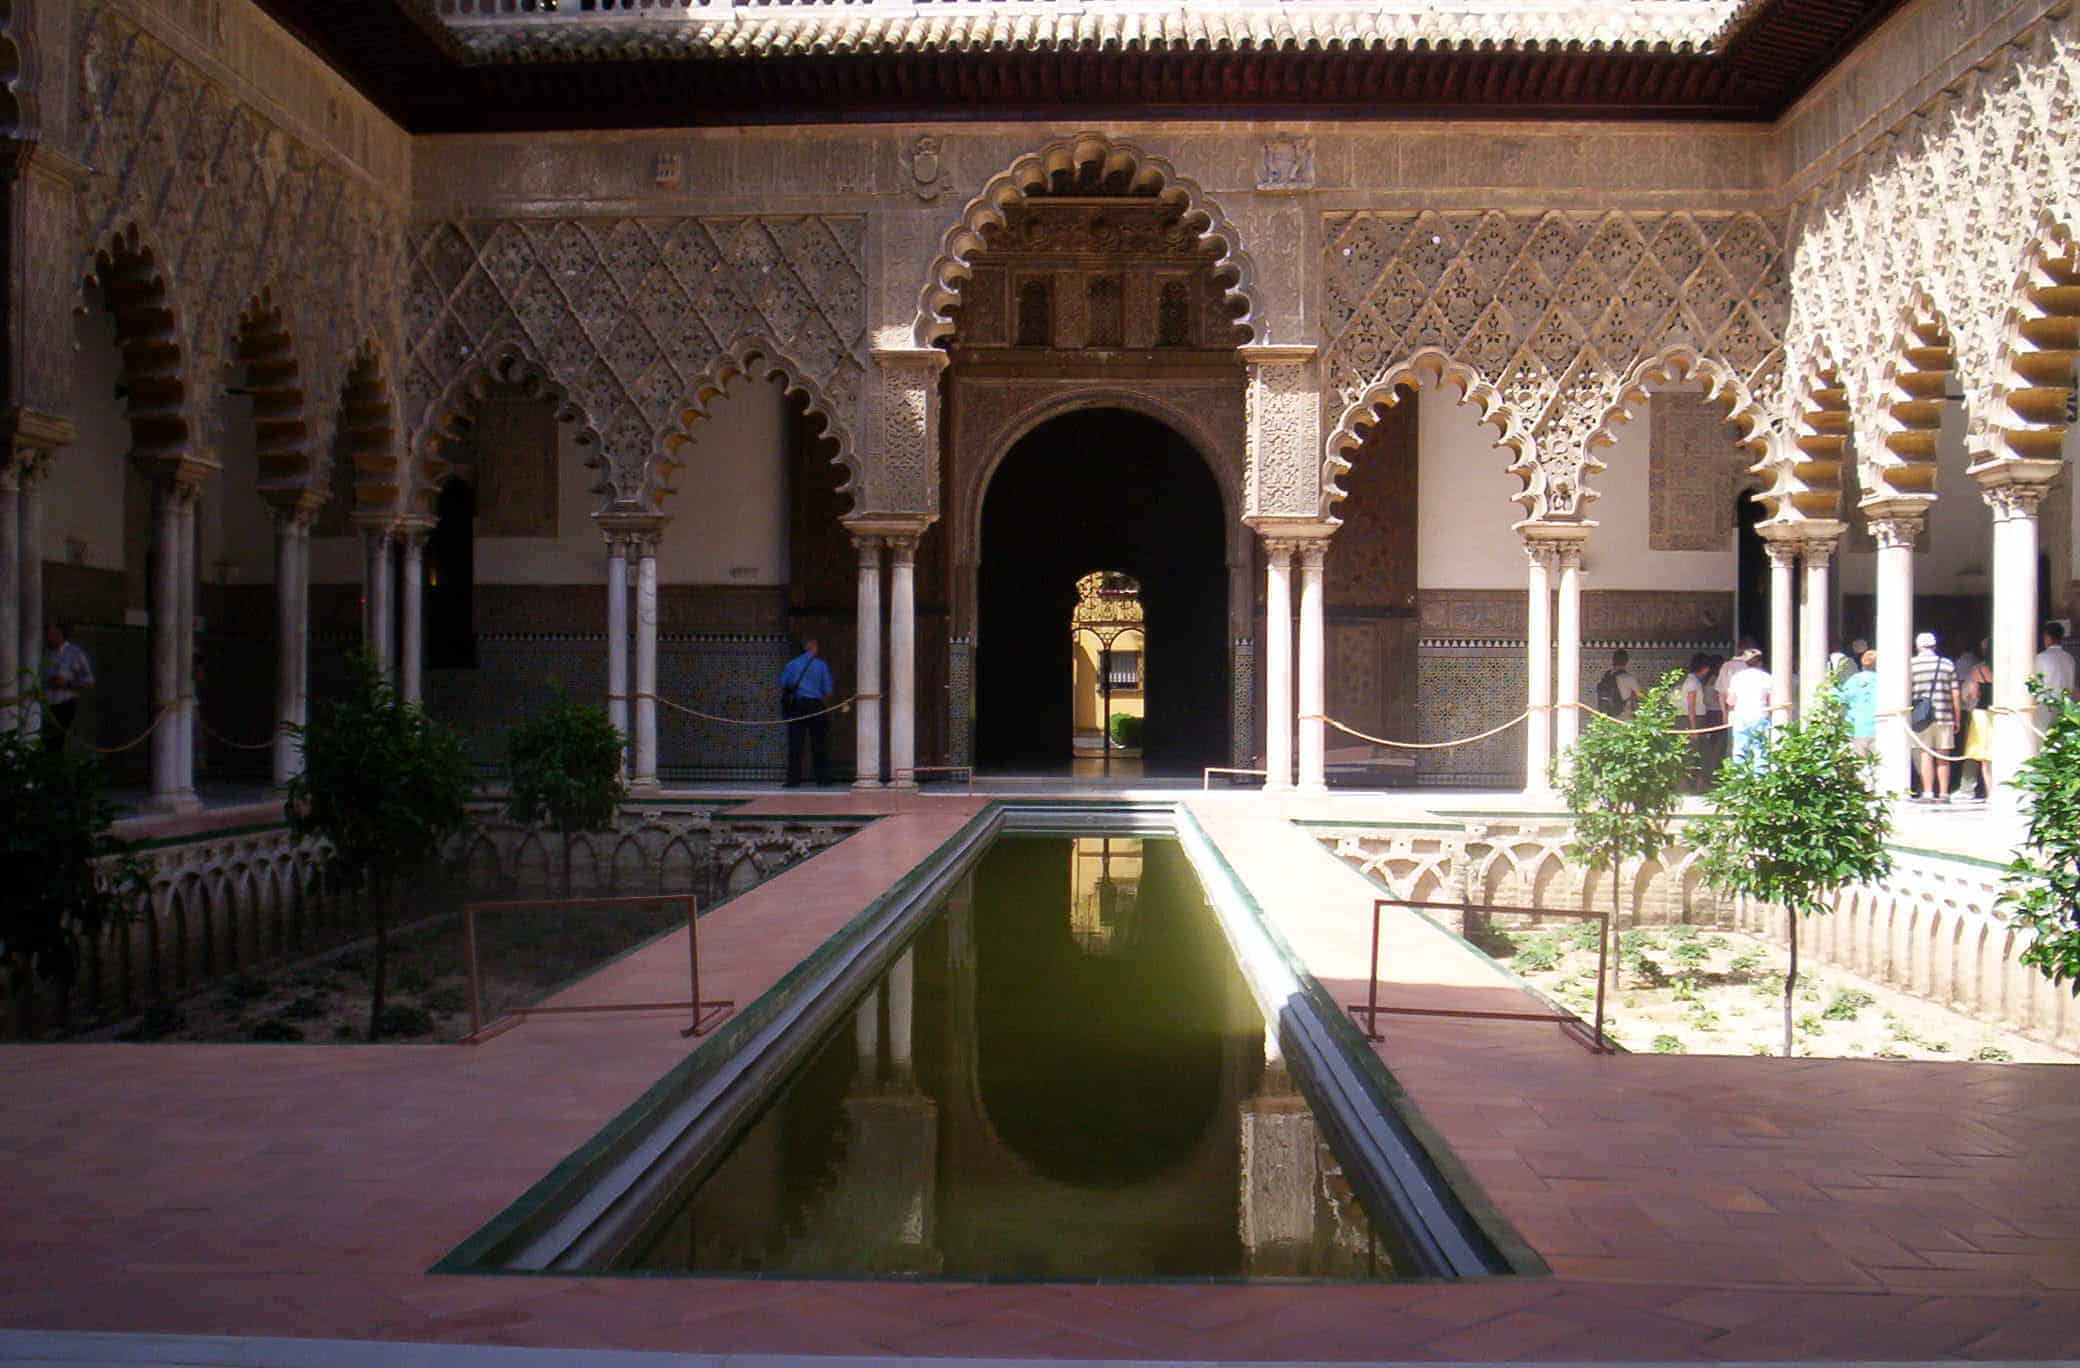 A pool gleams in the courtyard in the Alcazar in Seville.